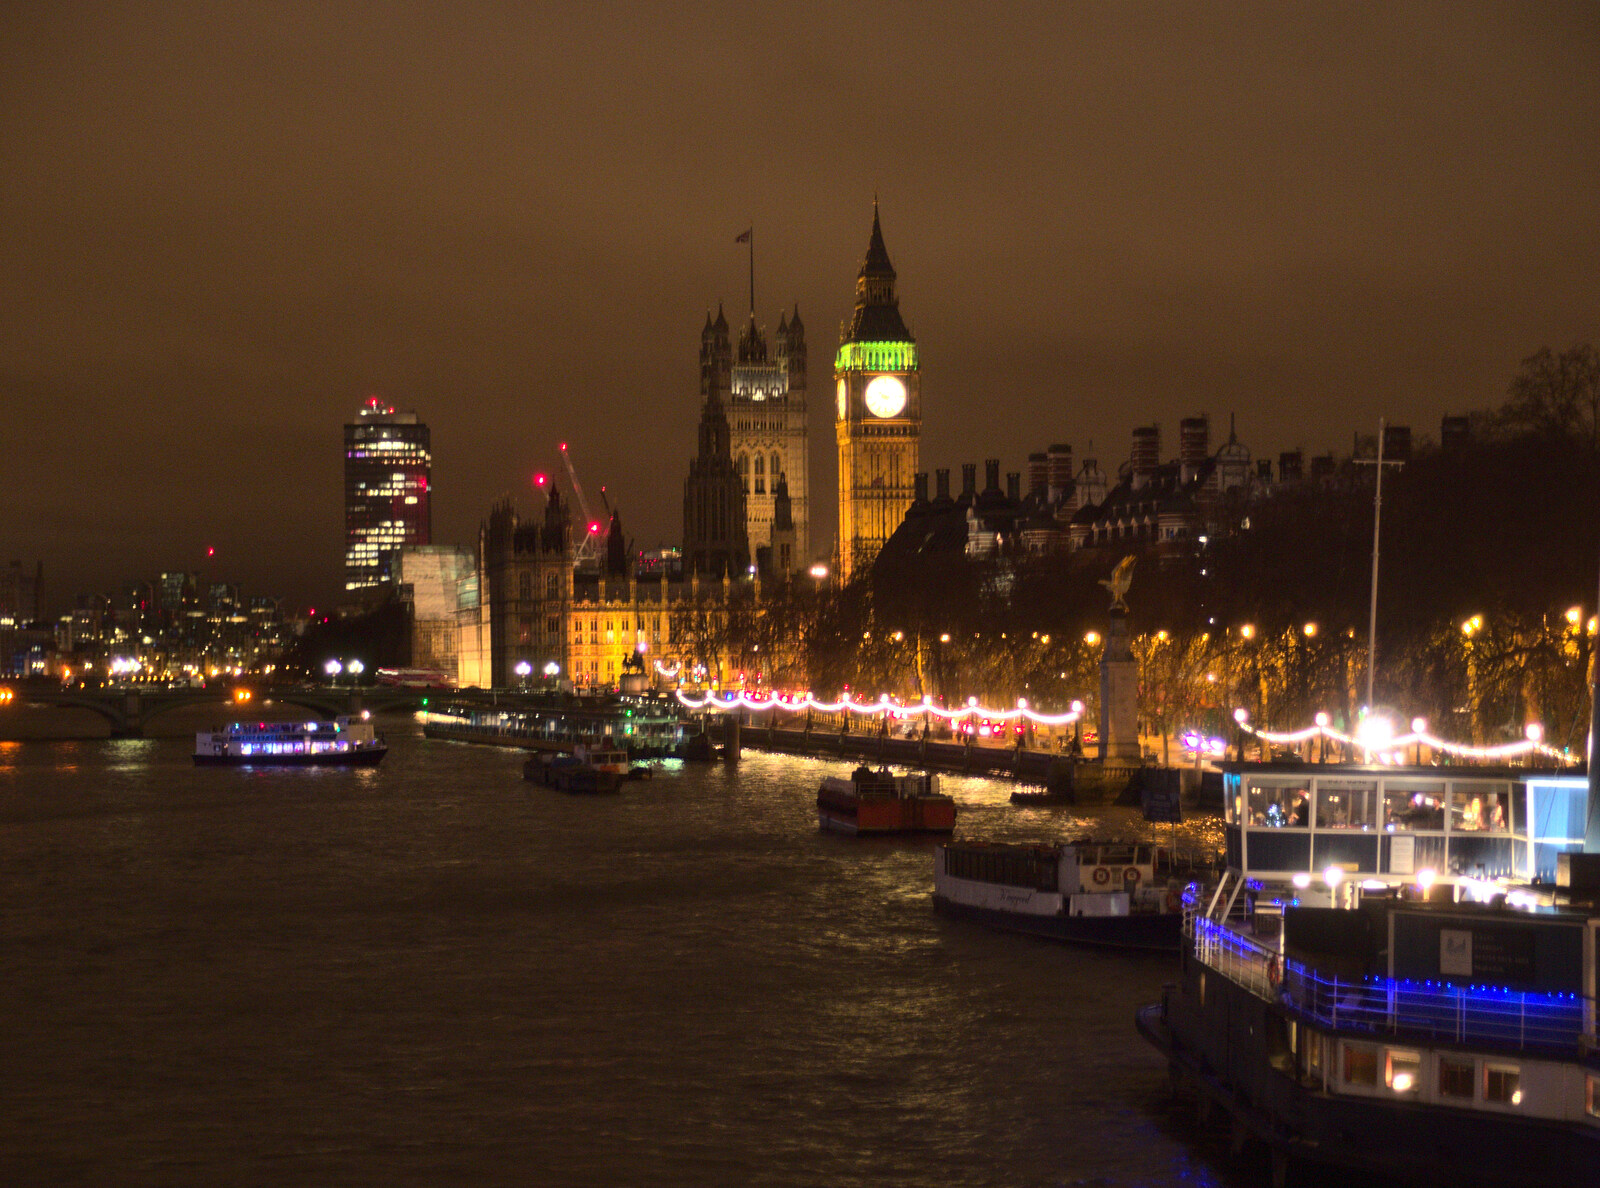 Houses of Parliament from SwiftKey Innovation Nights, Westminster, London - 19th December 2014